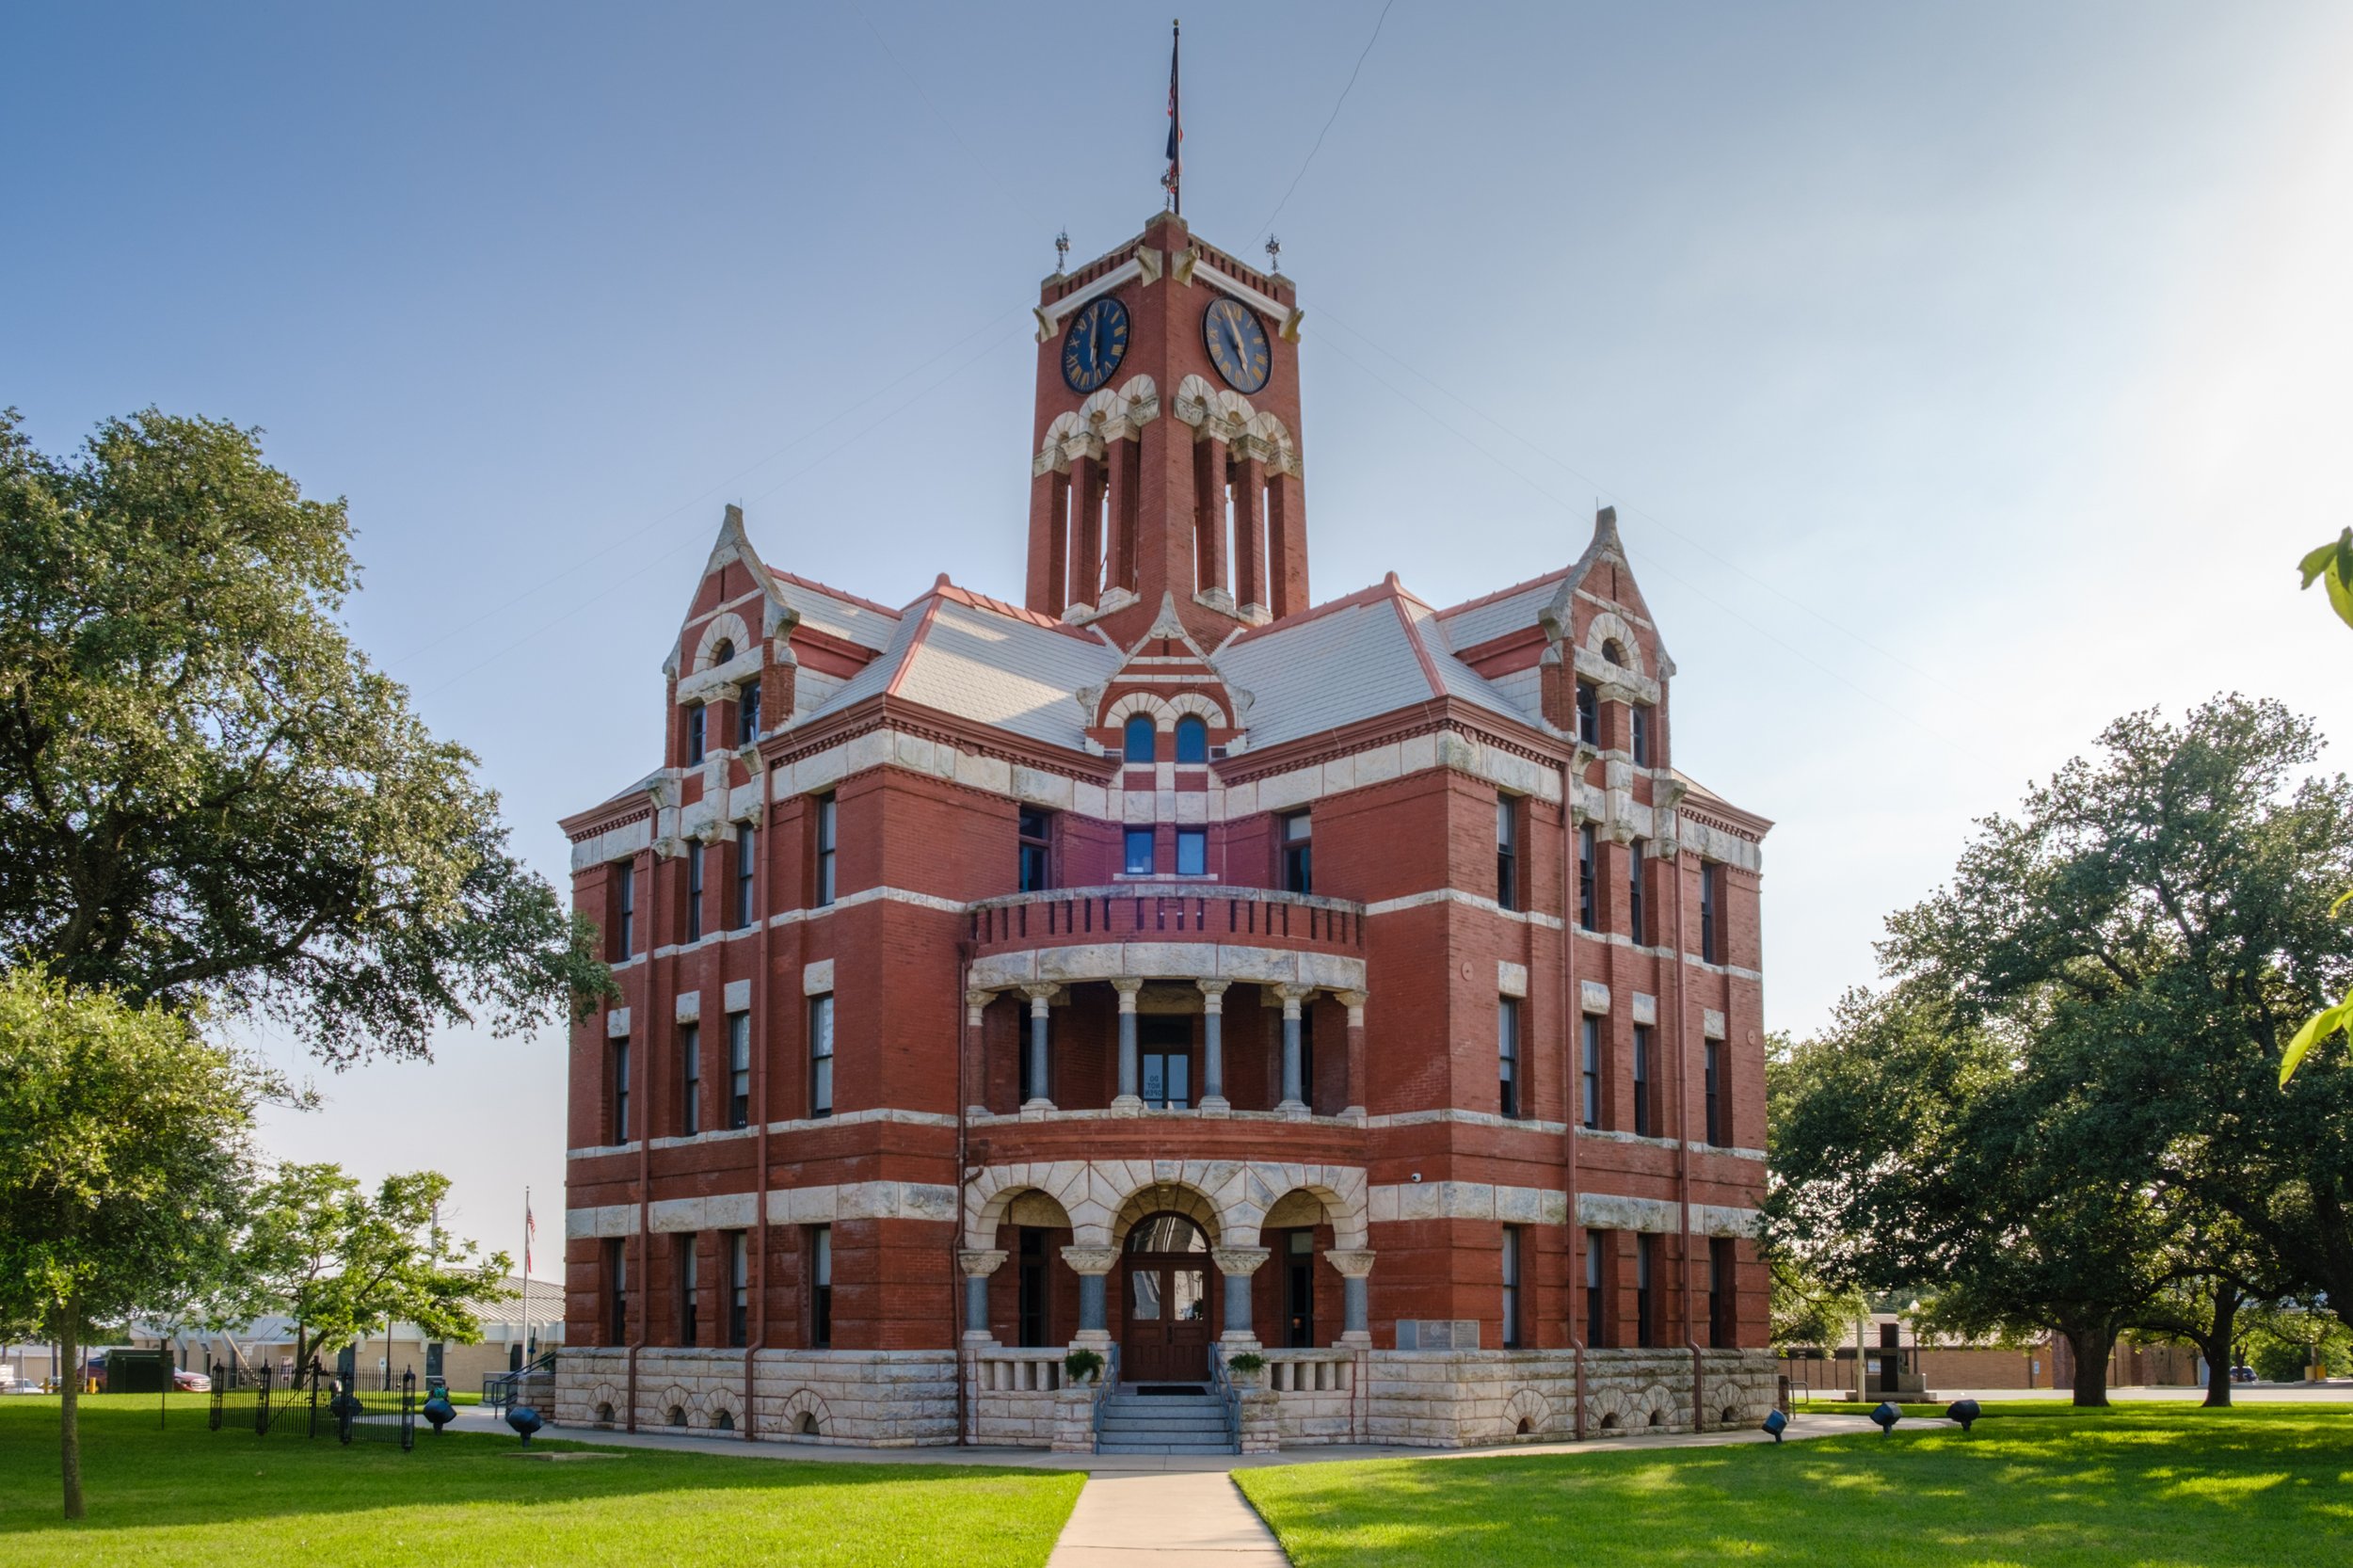 Town Square and Historic Lee County Courthouse built in 1899_iStock-1151088940.jpg